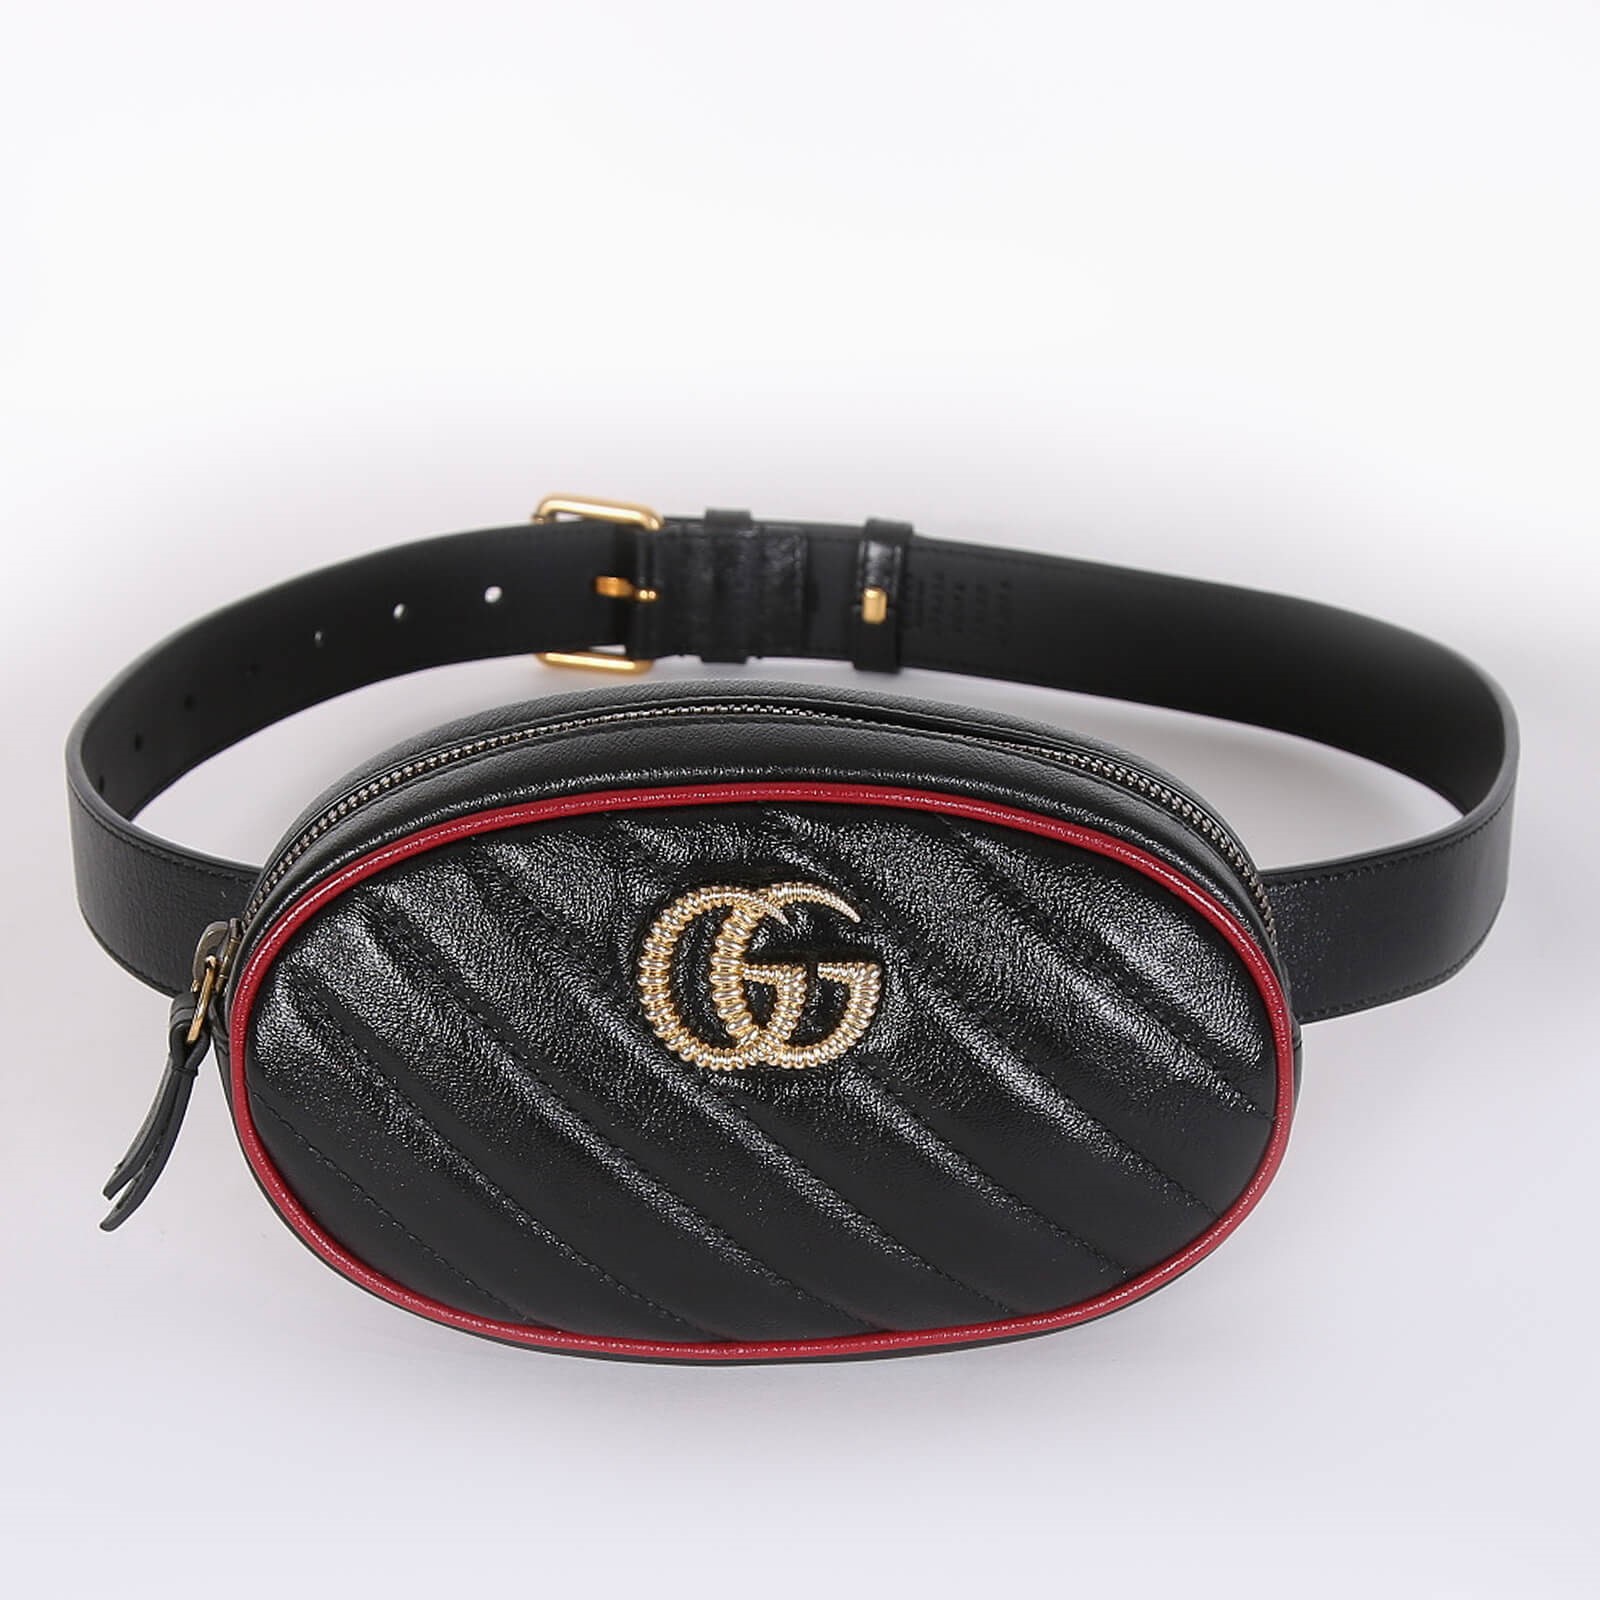 GG leather belt in black - Gucci